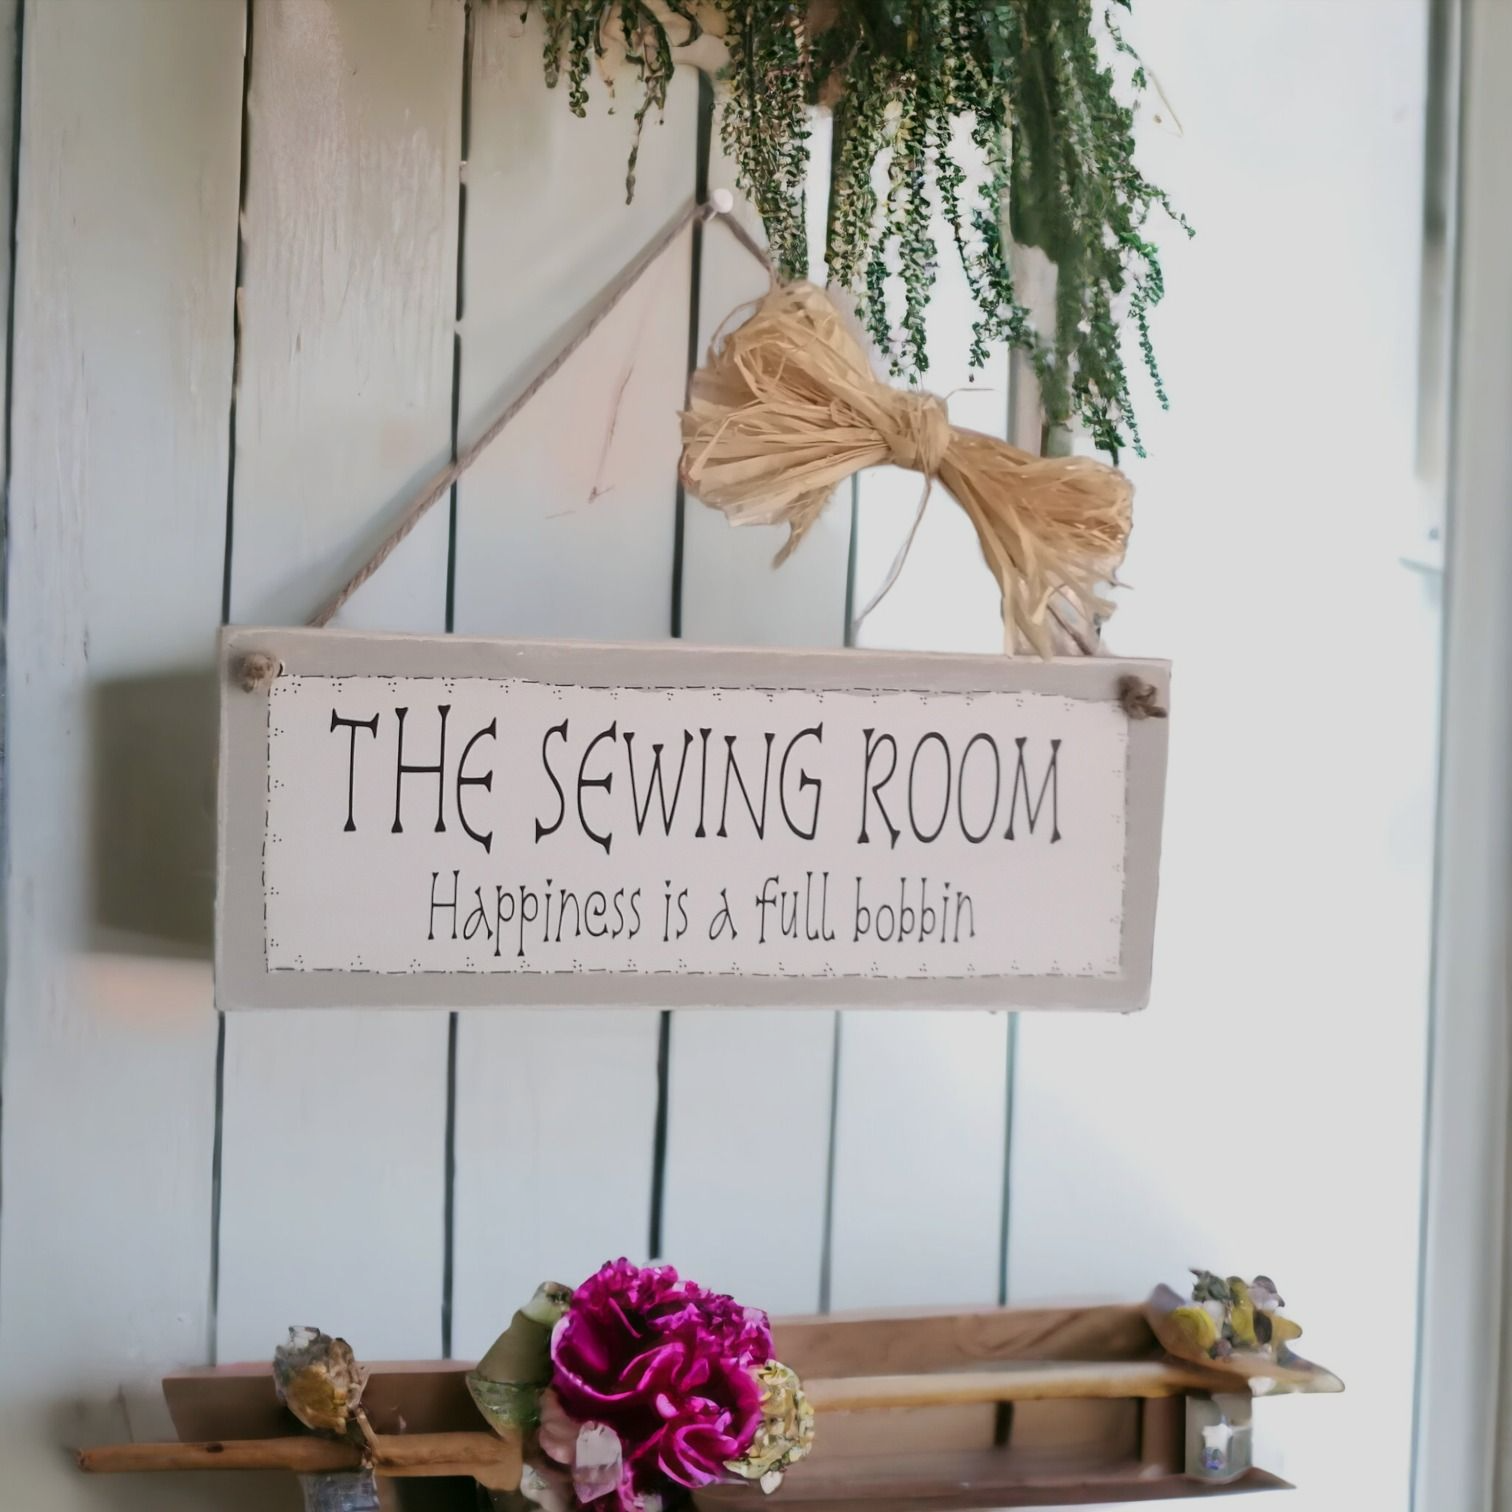 HANDMADE PLAQUES FOR YOUR OWN WORDING